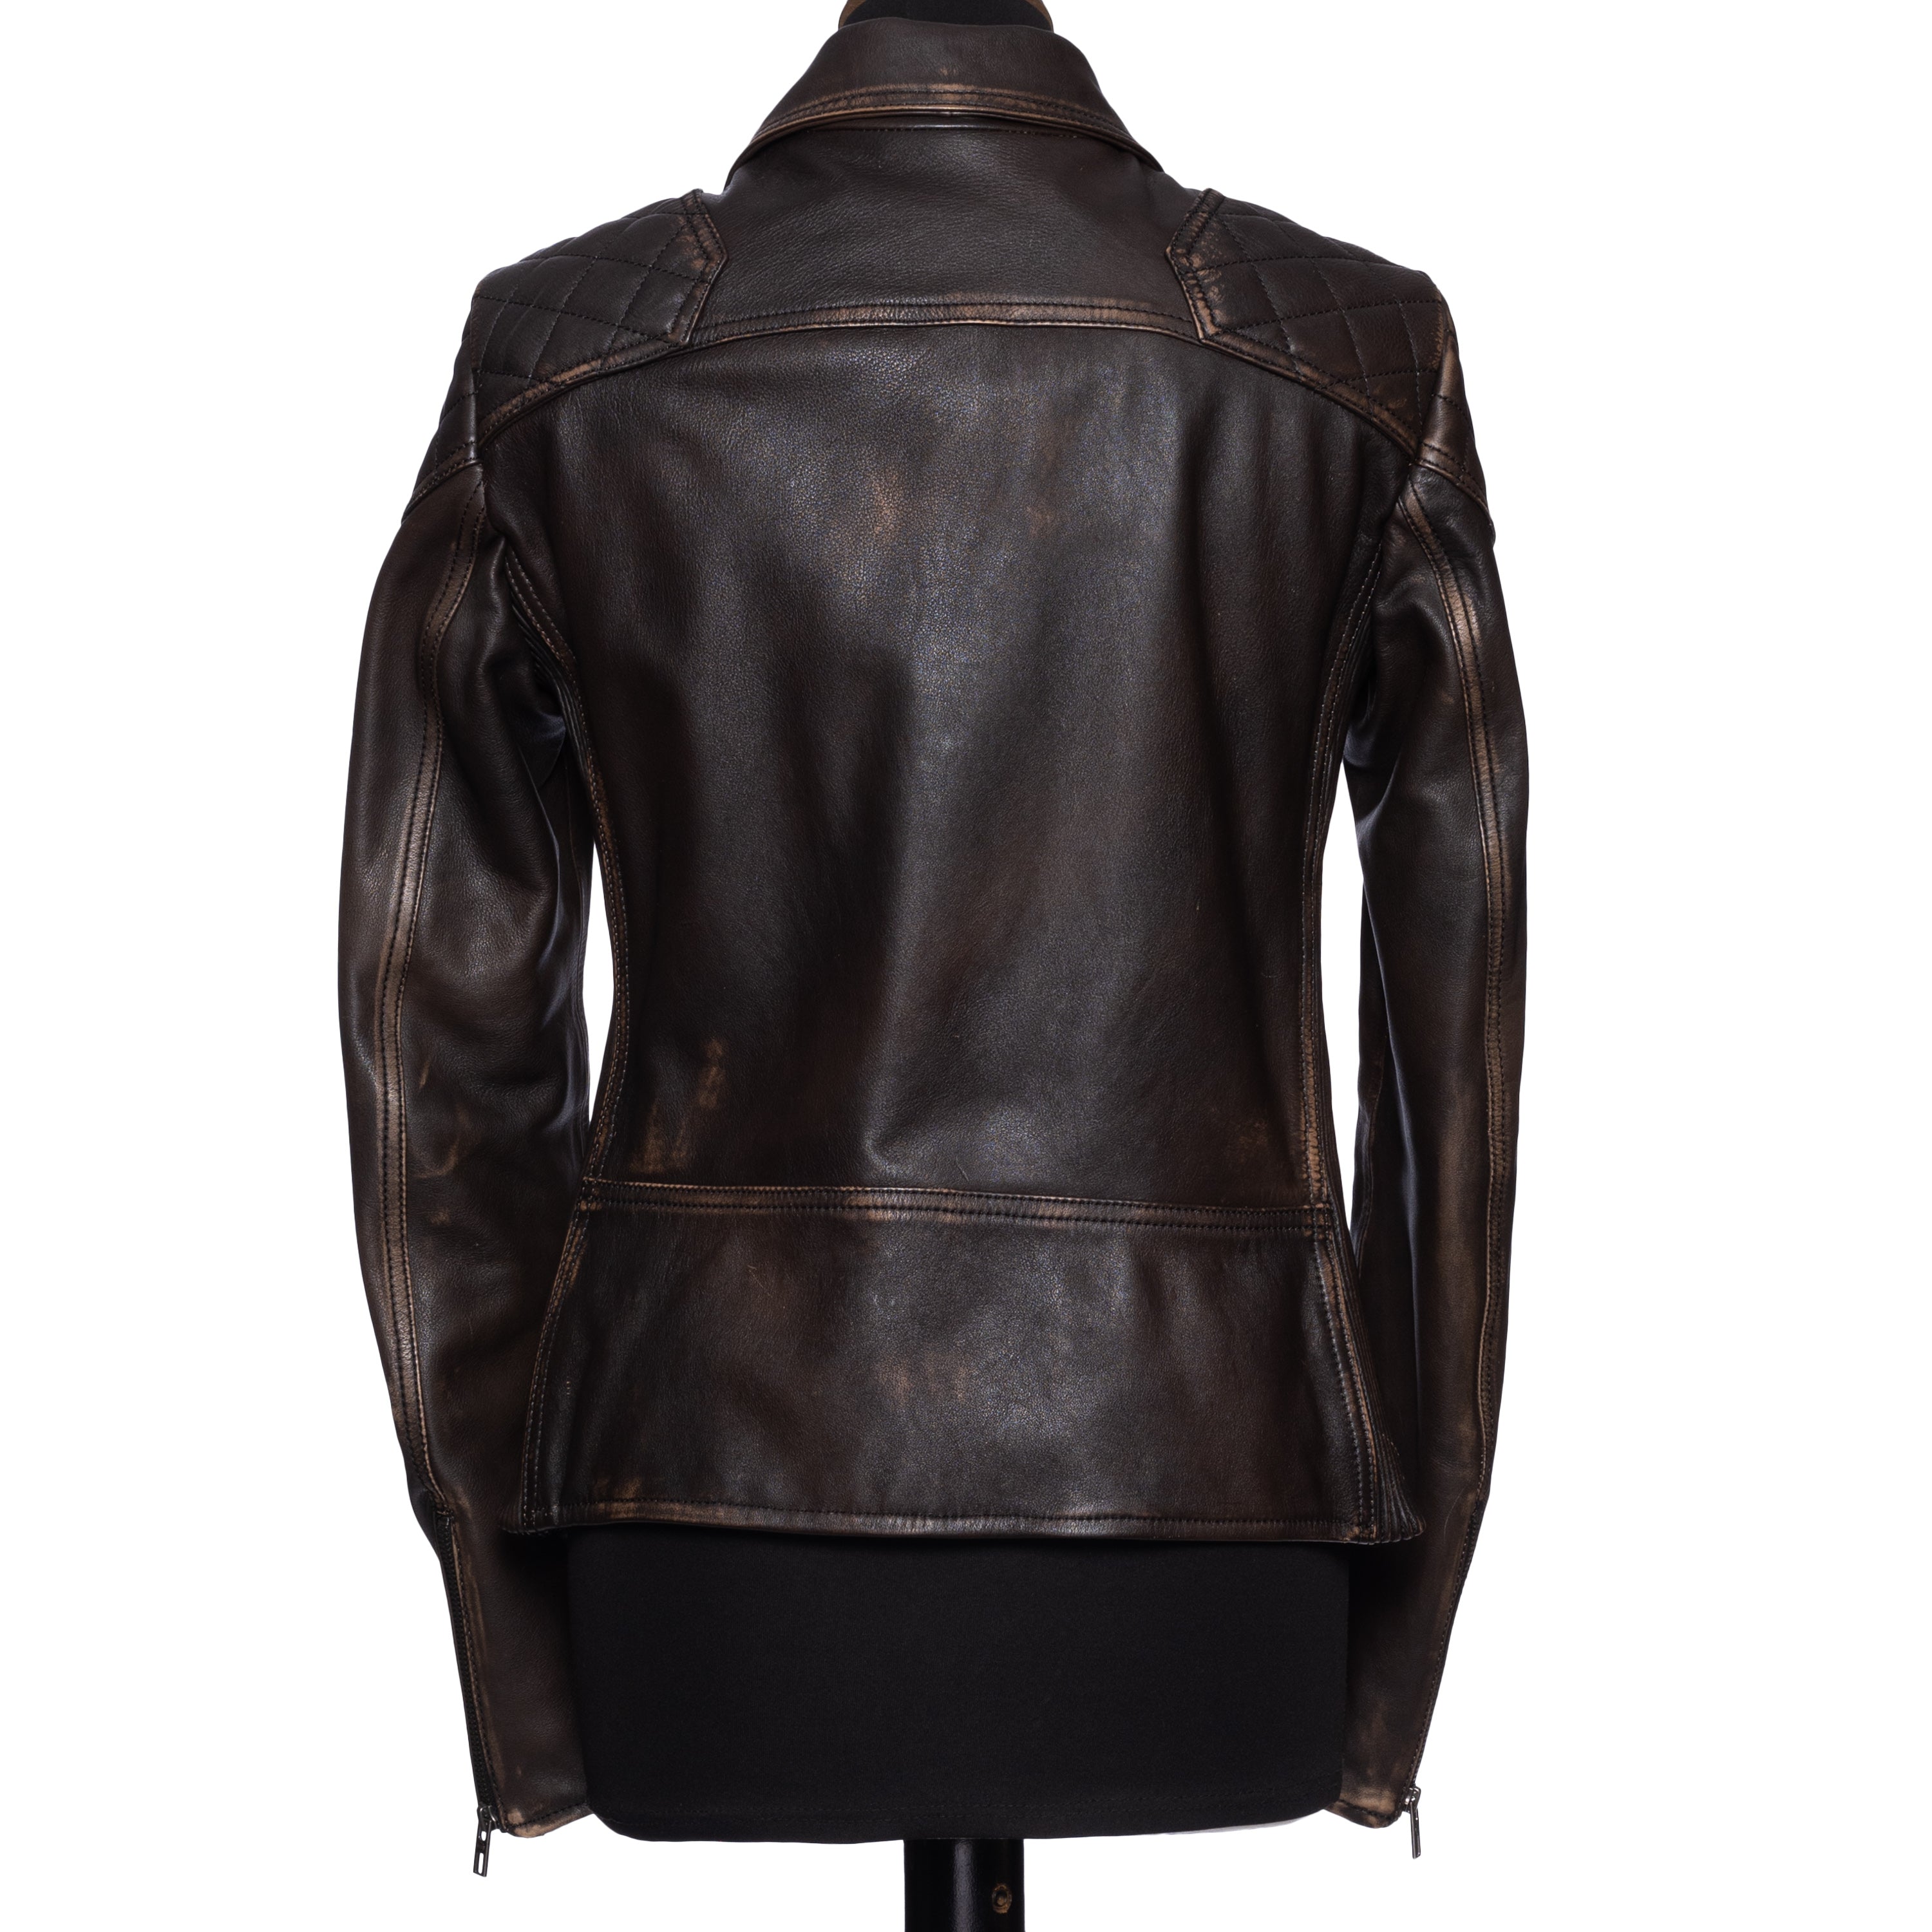 THEDI LEATHERS Brown Leather Motorcycle Biker Women's Jacket Size S WOMEN'S BOUTIQUE